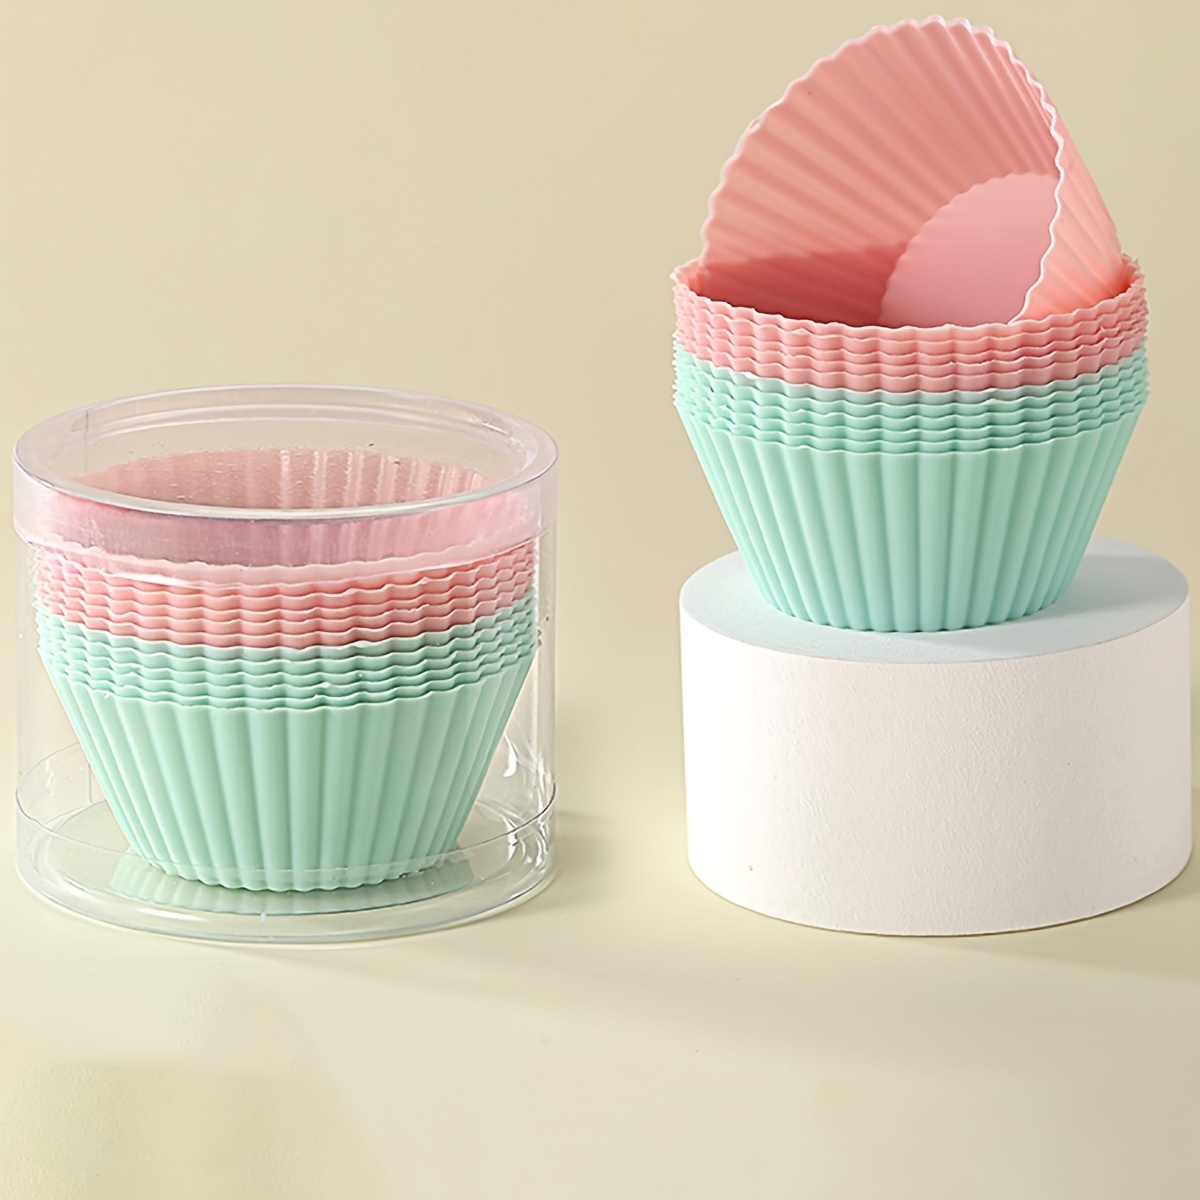 Silicone Baking Cups, Standard Size Muffin Cups, Silicone Cupcake Baking  Cups Reusable Muffin Liners Cupcake Wrapper Cups Holders for Muffins